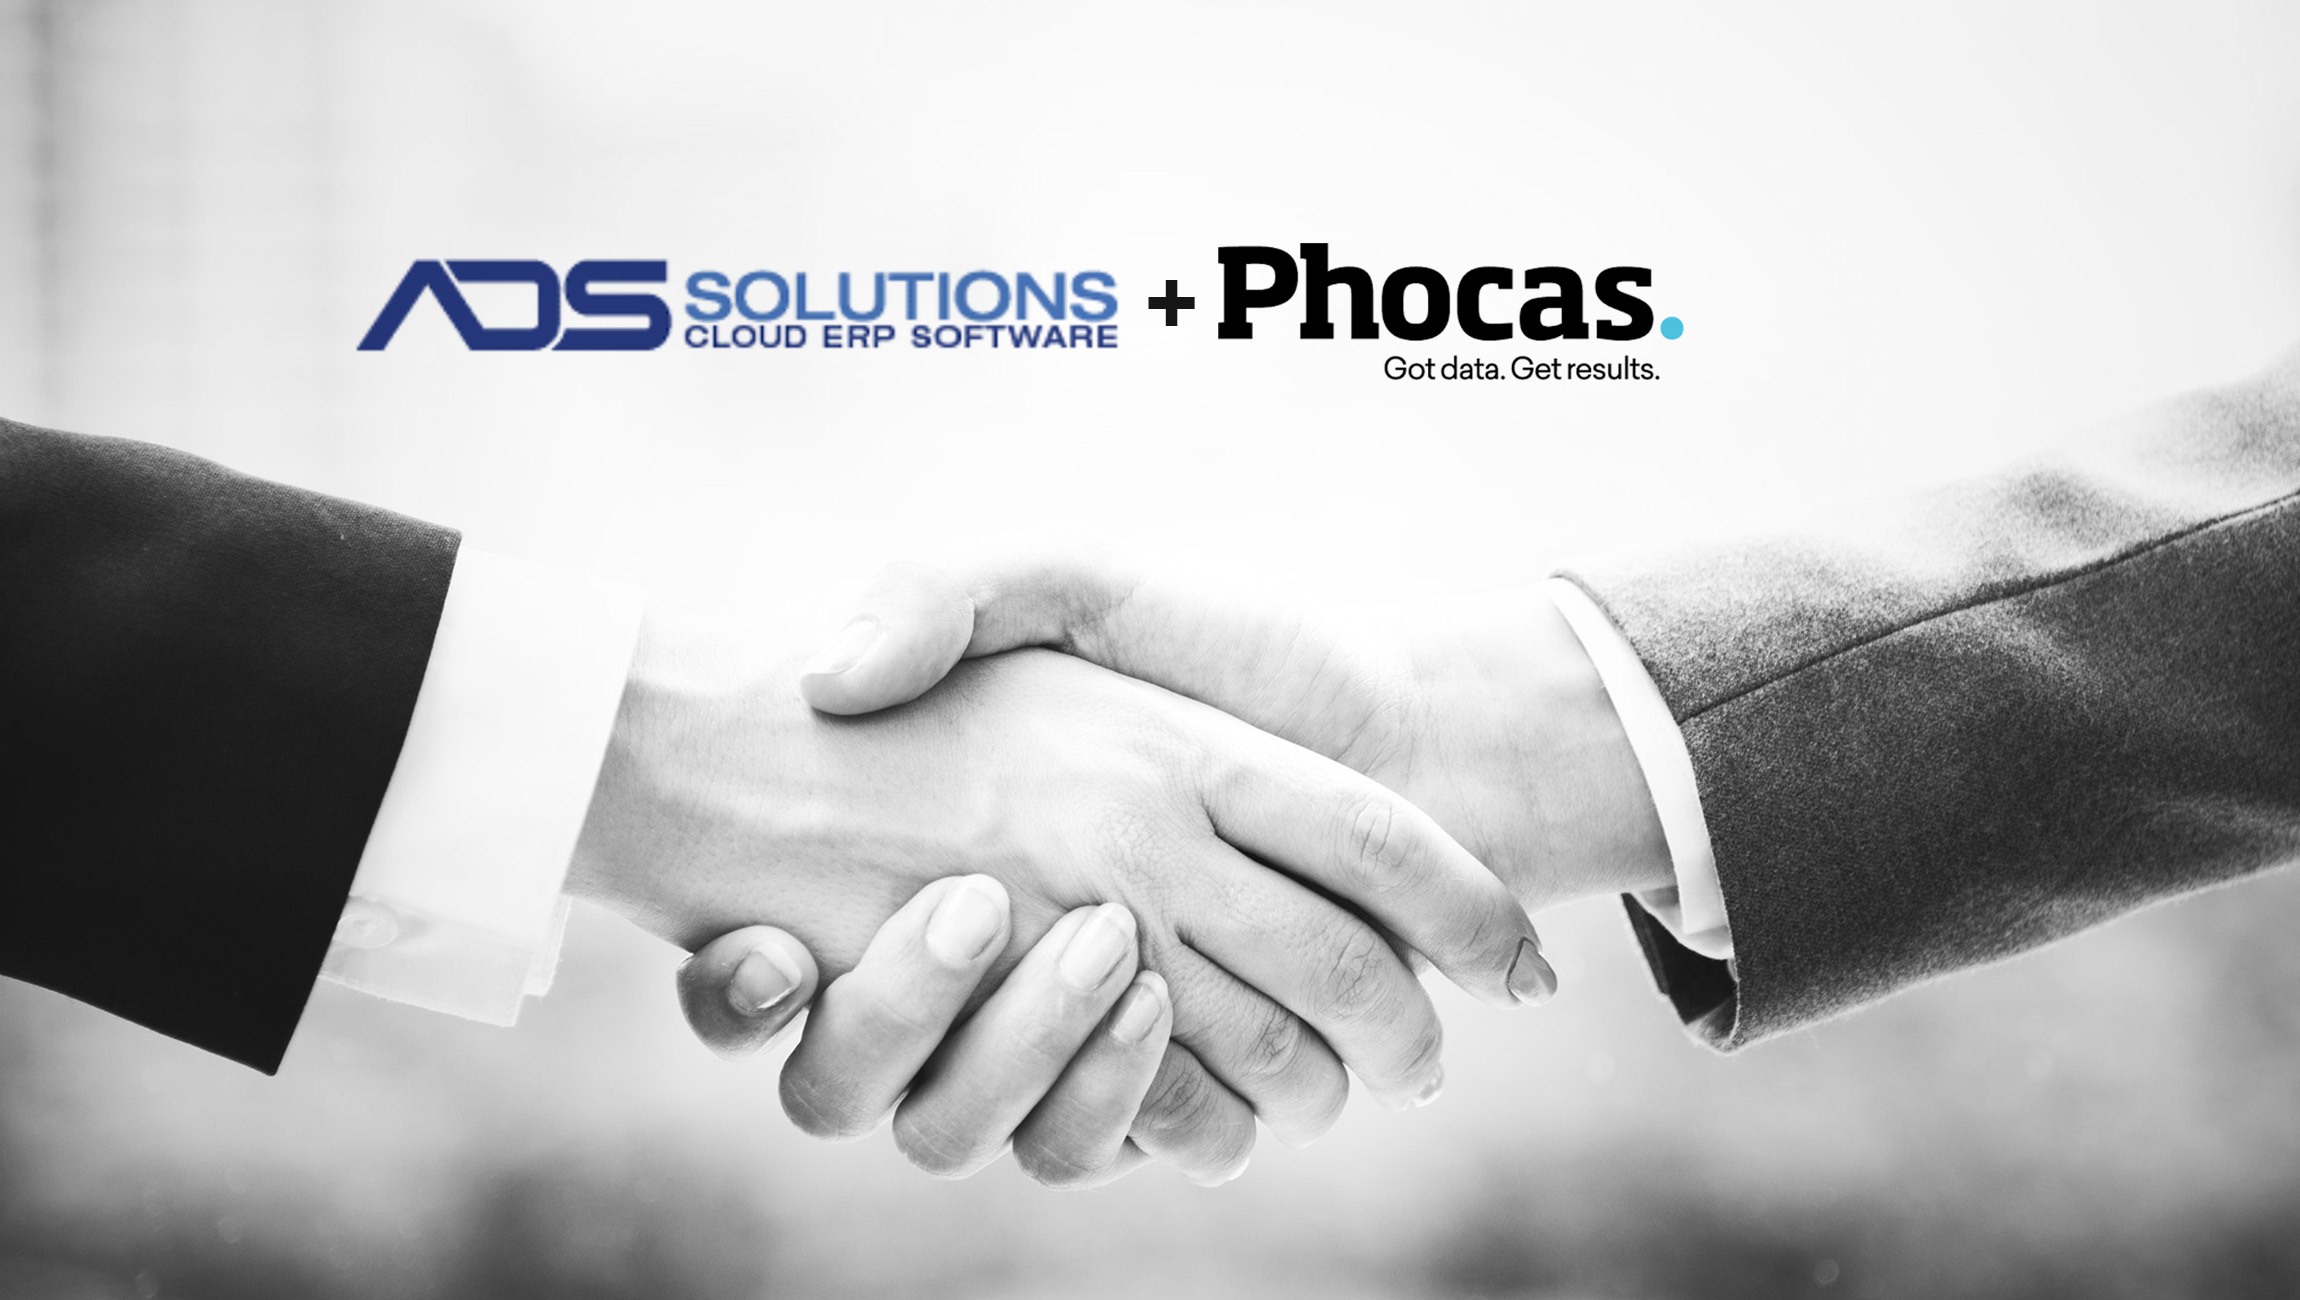 ADS-Solutions-and-Phocas-Software-announce-a-partnership-for-BI-and-data-analytics-technology